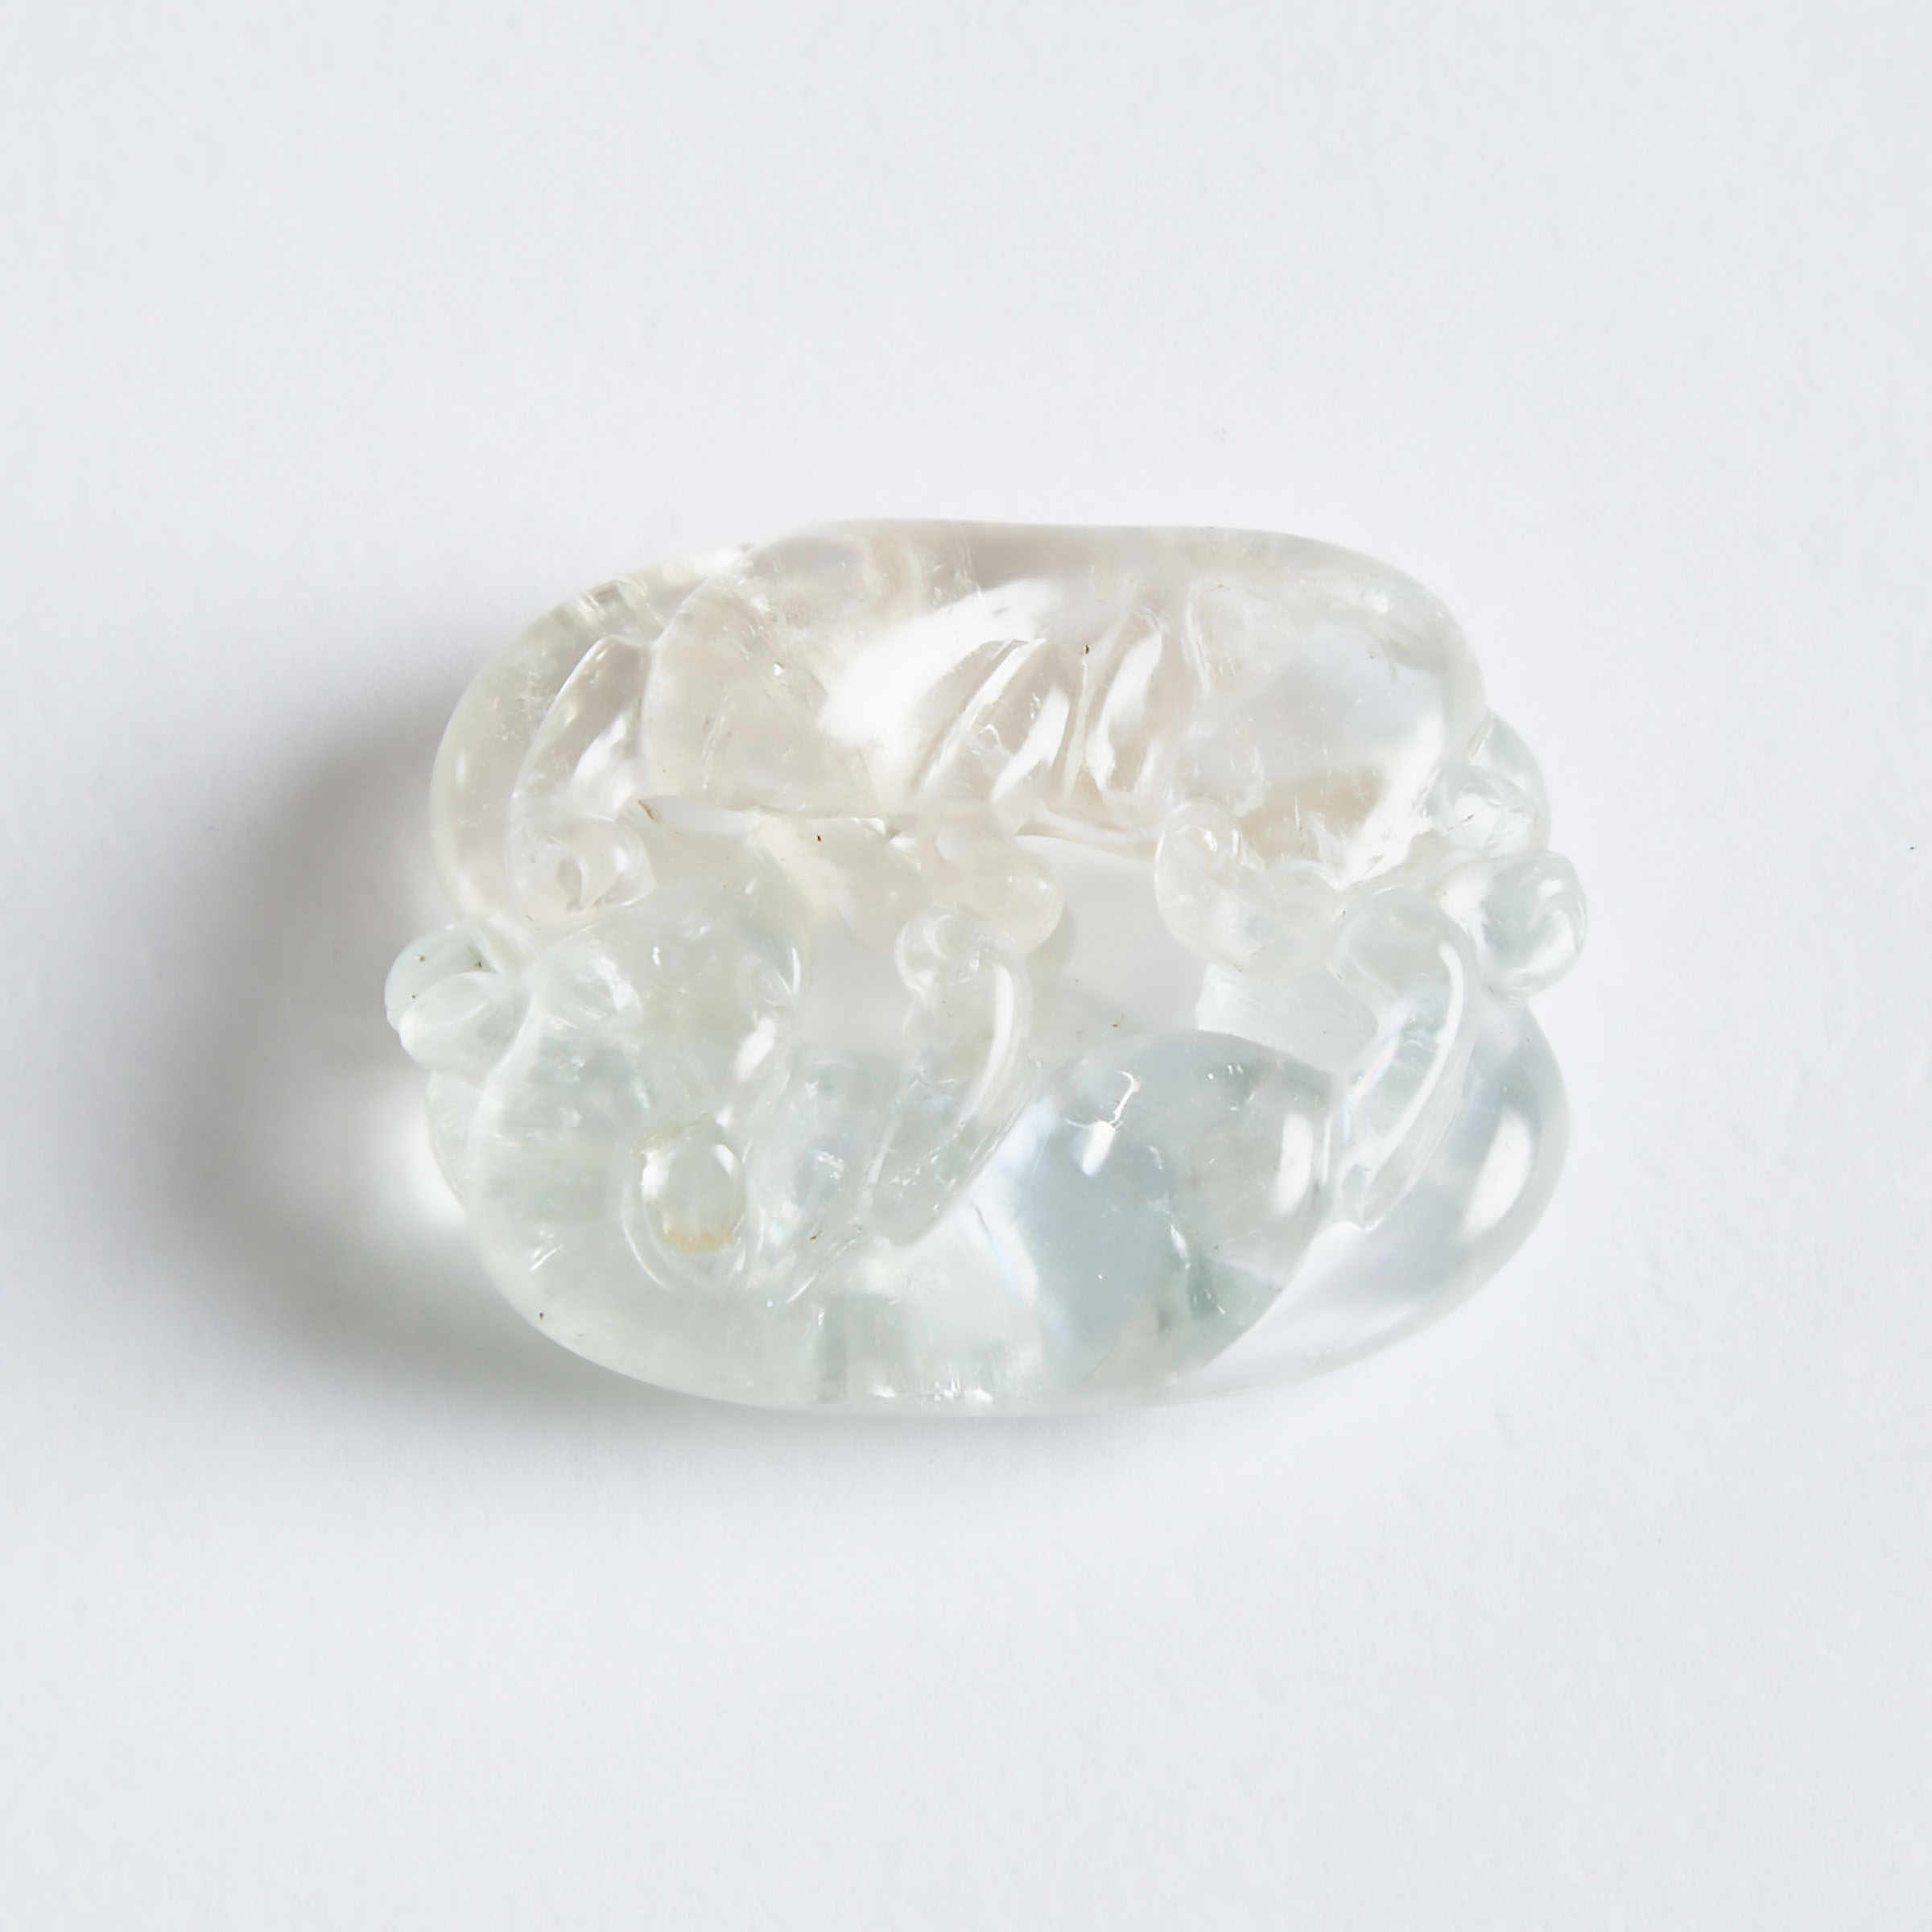 A Rock Crystal Carving of Two Badgers, Qing Dynasty, 18th/19th Century